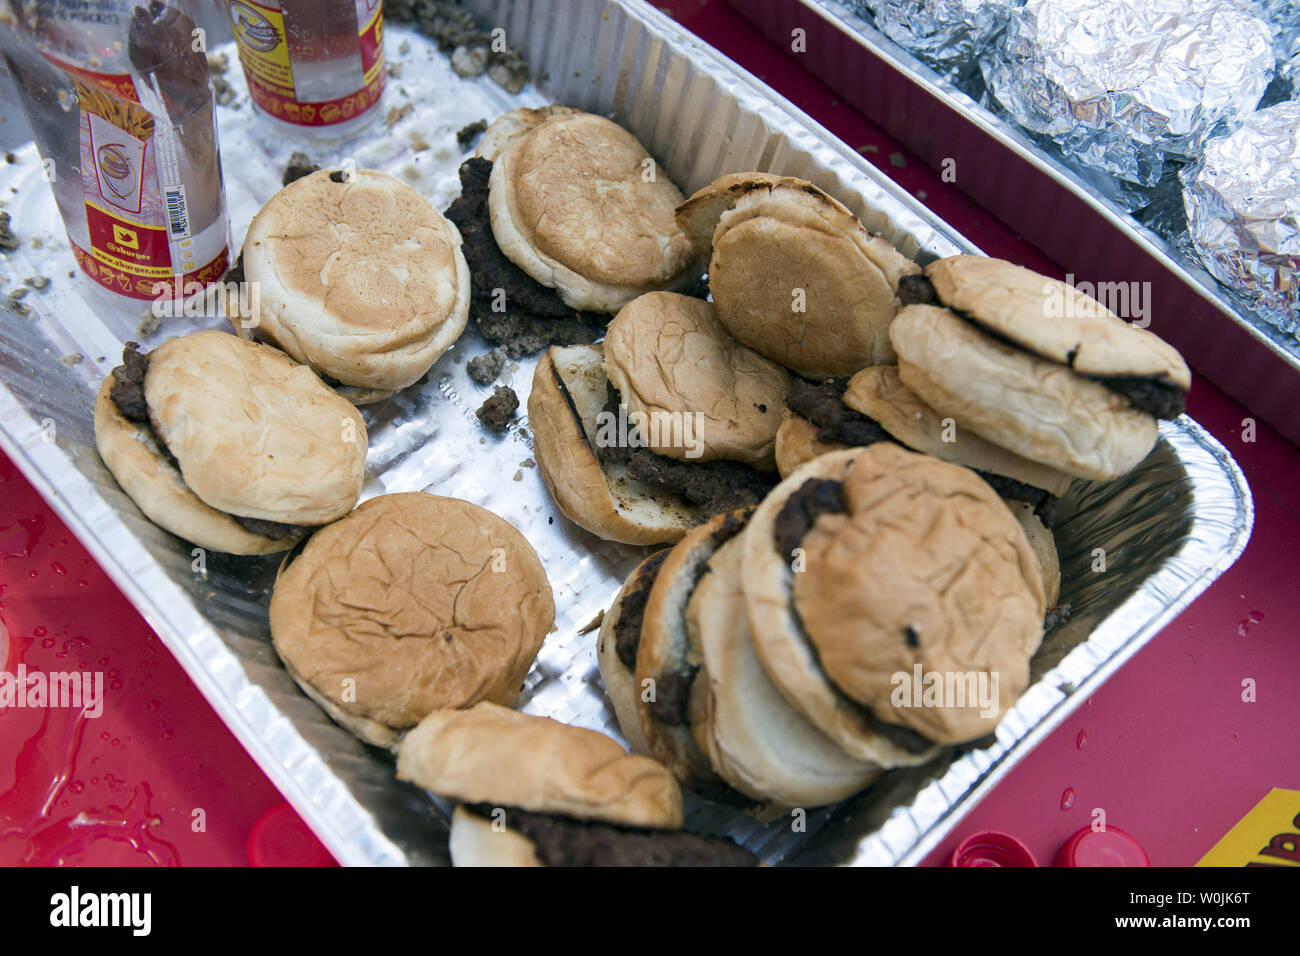 Uneaten hamburgers are seen after the Z-Burger 8th Annual Independence Burger Eating Championship, in Washington D.C. on July 3, 2017. Molly Schuyler won this year's contest eating 21 burgers in 10 minutes. Photo by Kevin Dietsch/UPI Stock Photo